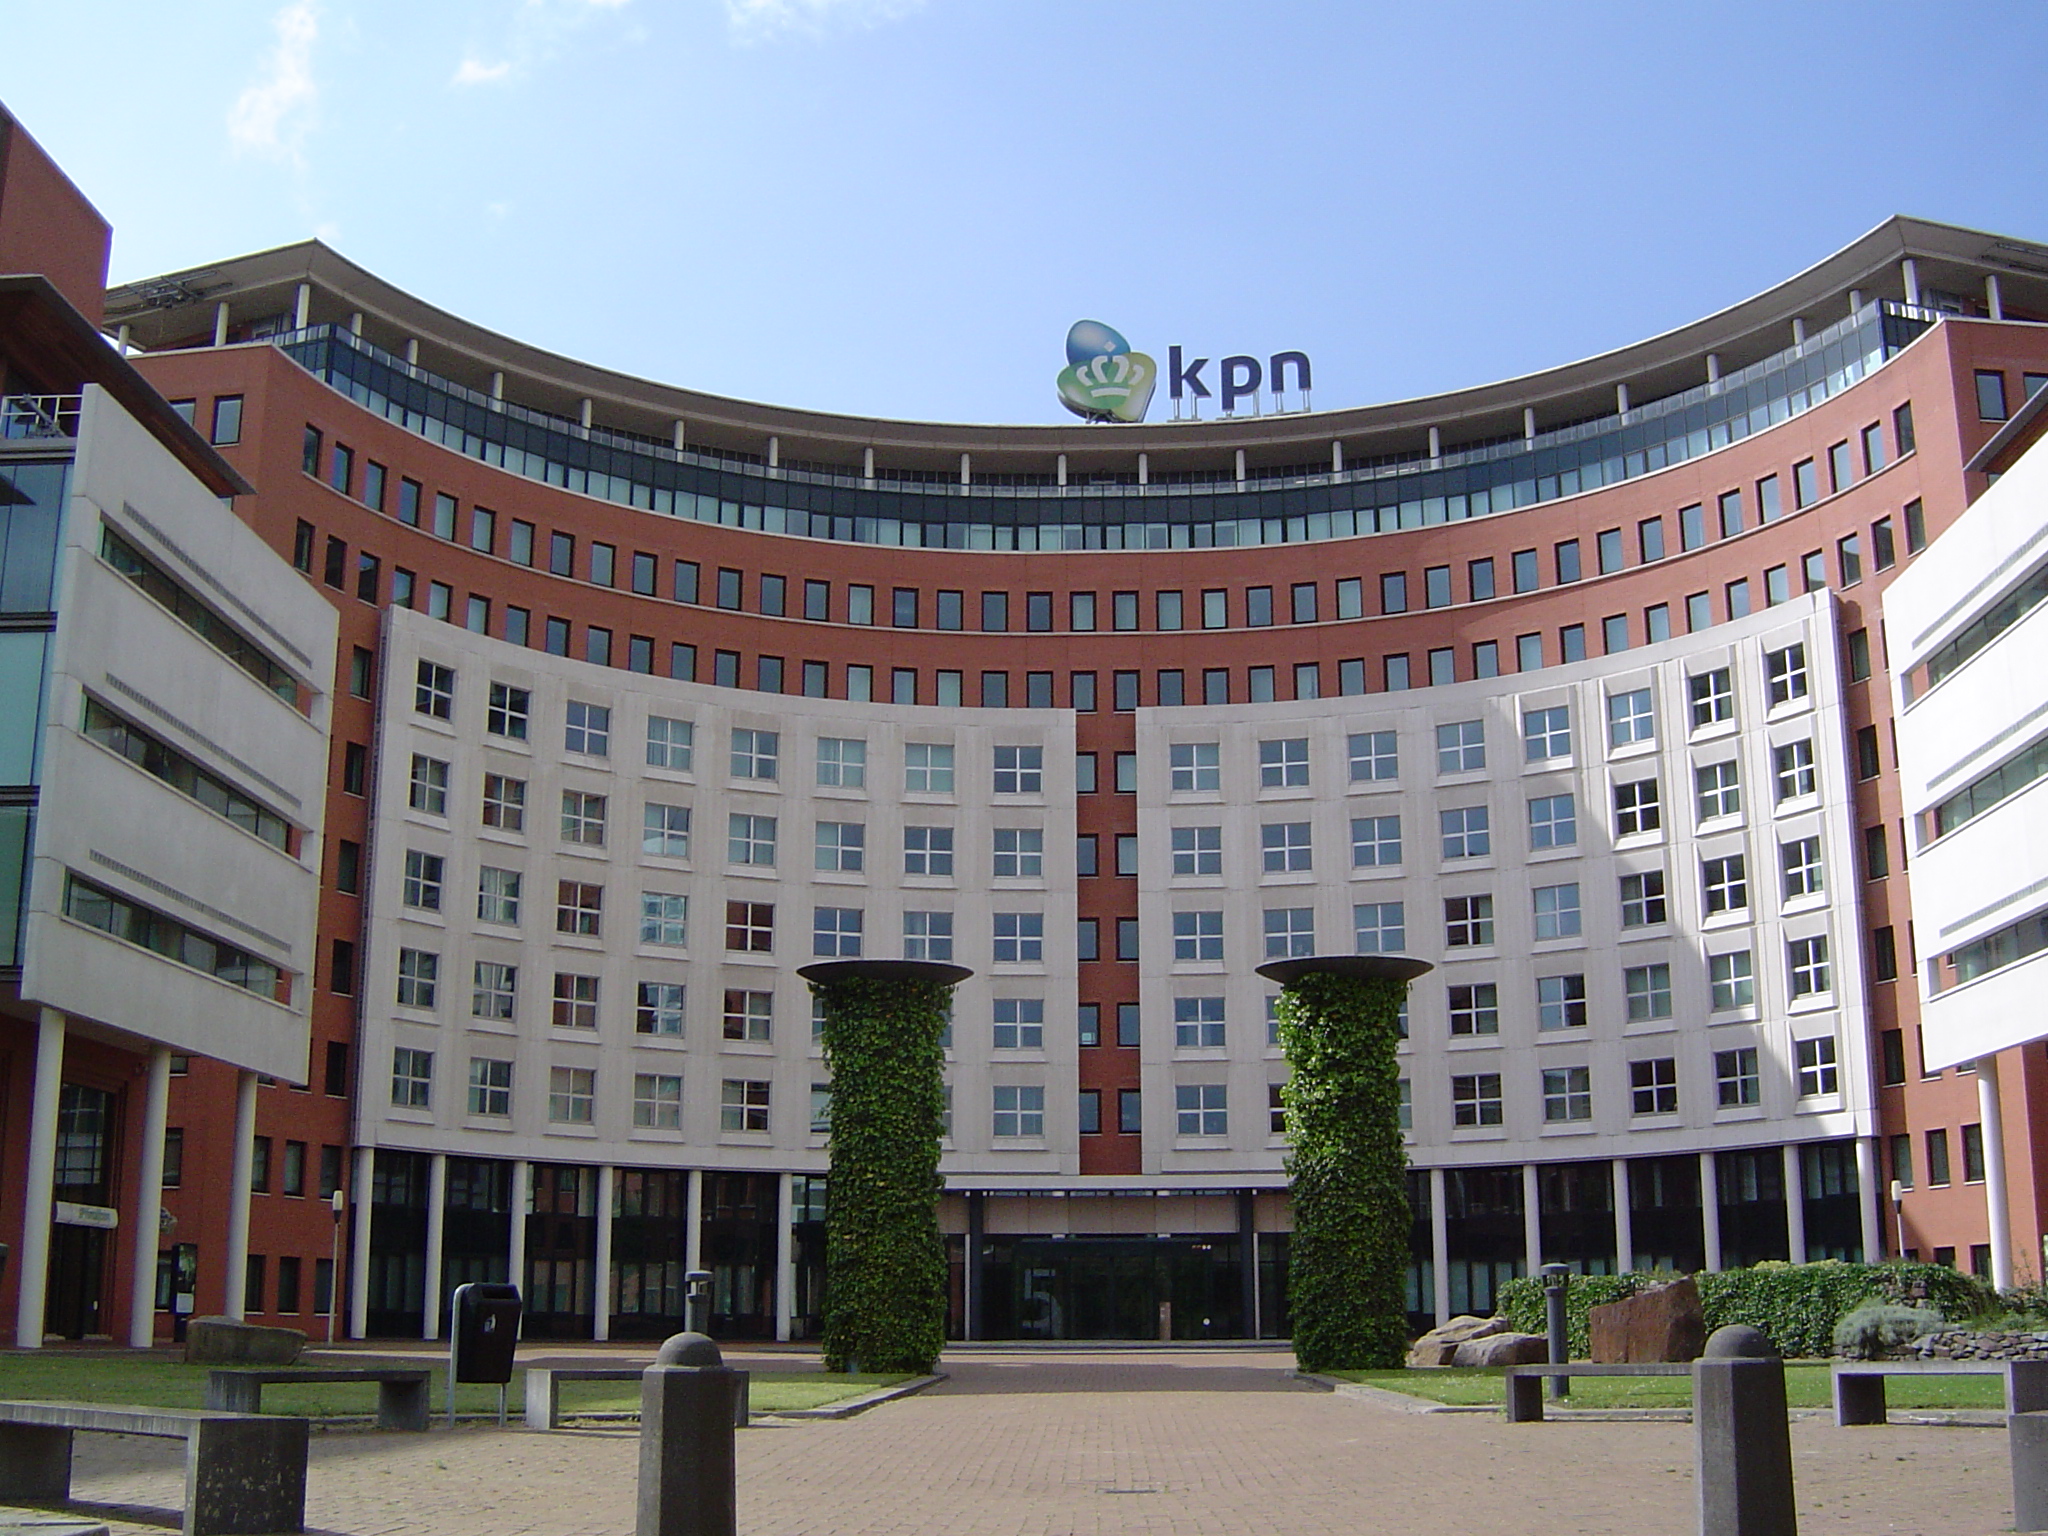 UPDATE 2-KPN drops new CEO Leroy amid investigation into share sale